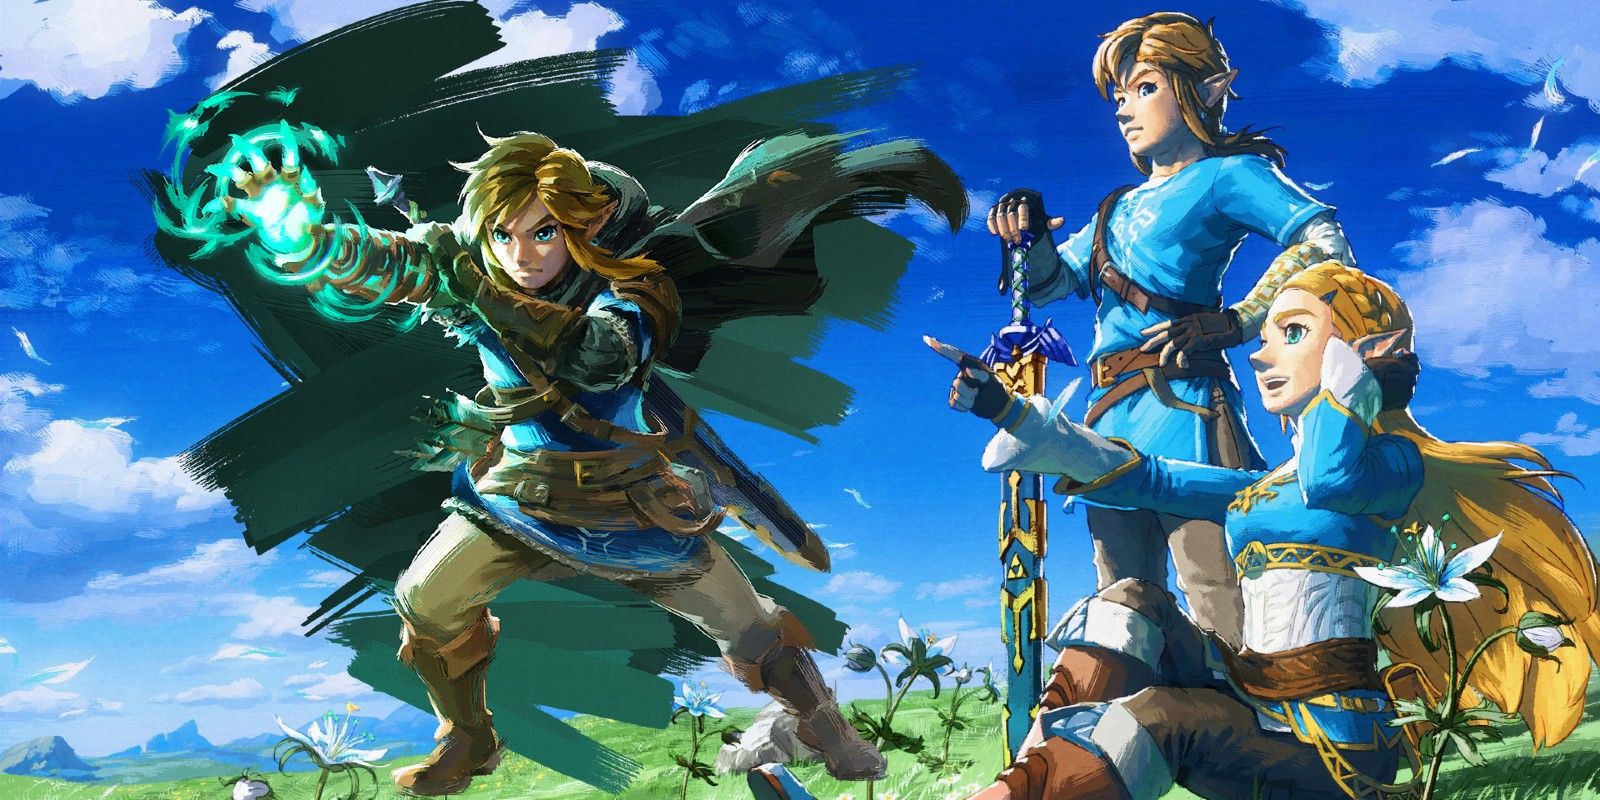 Image of The Legend of Zelda: Tears of the Kingdom's Link against anniversary artwork for Breath of the Wild featuring Link and Zelda.